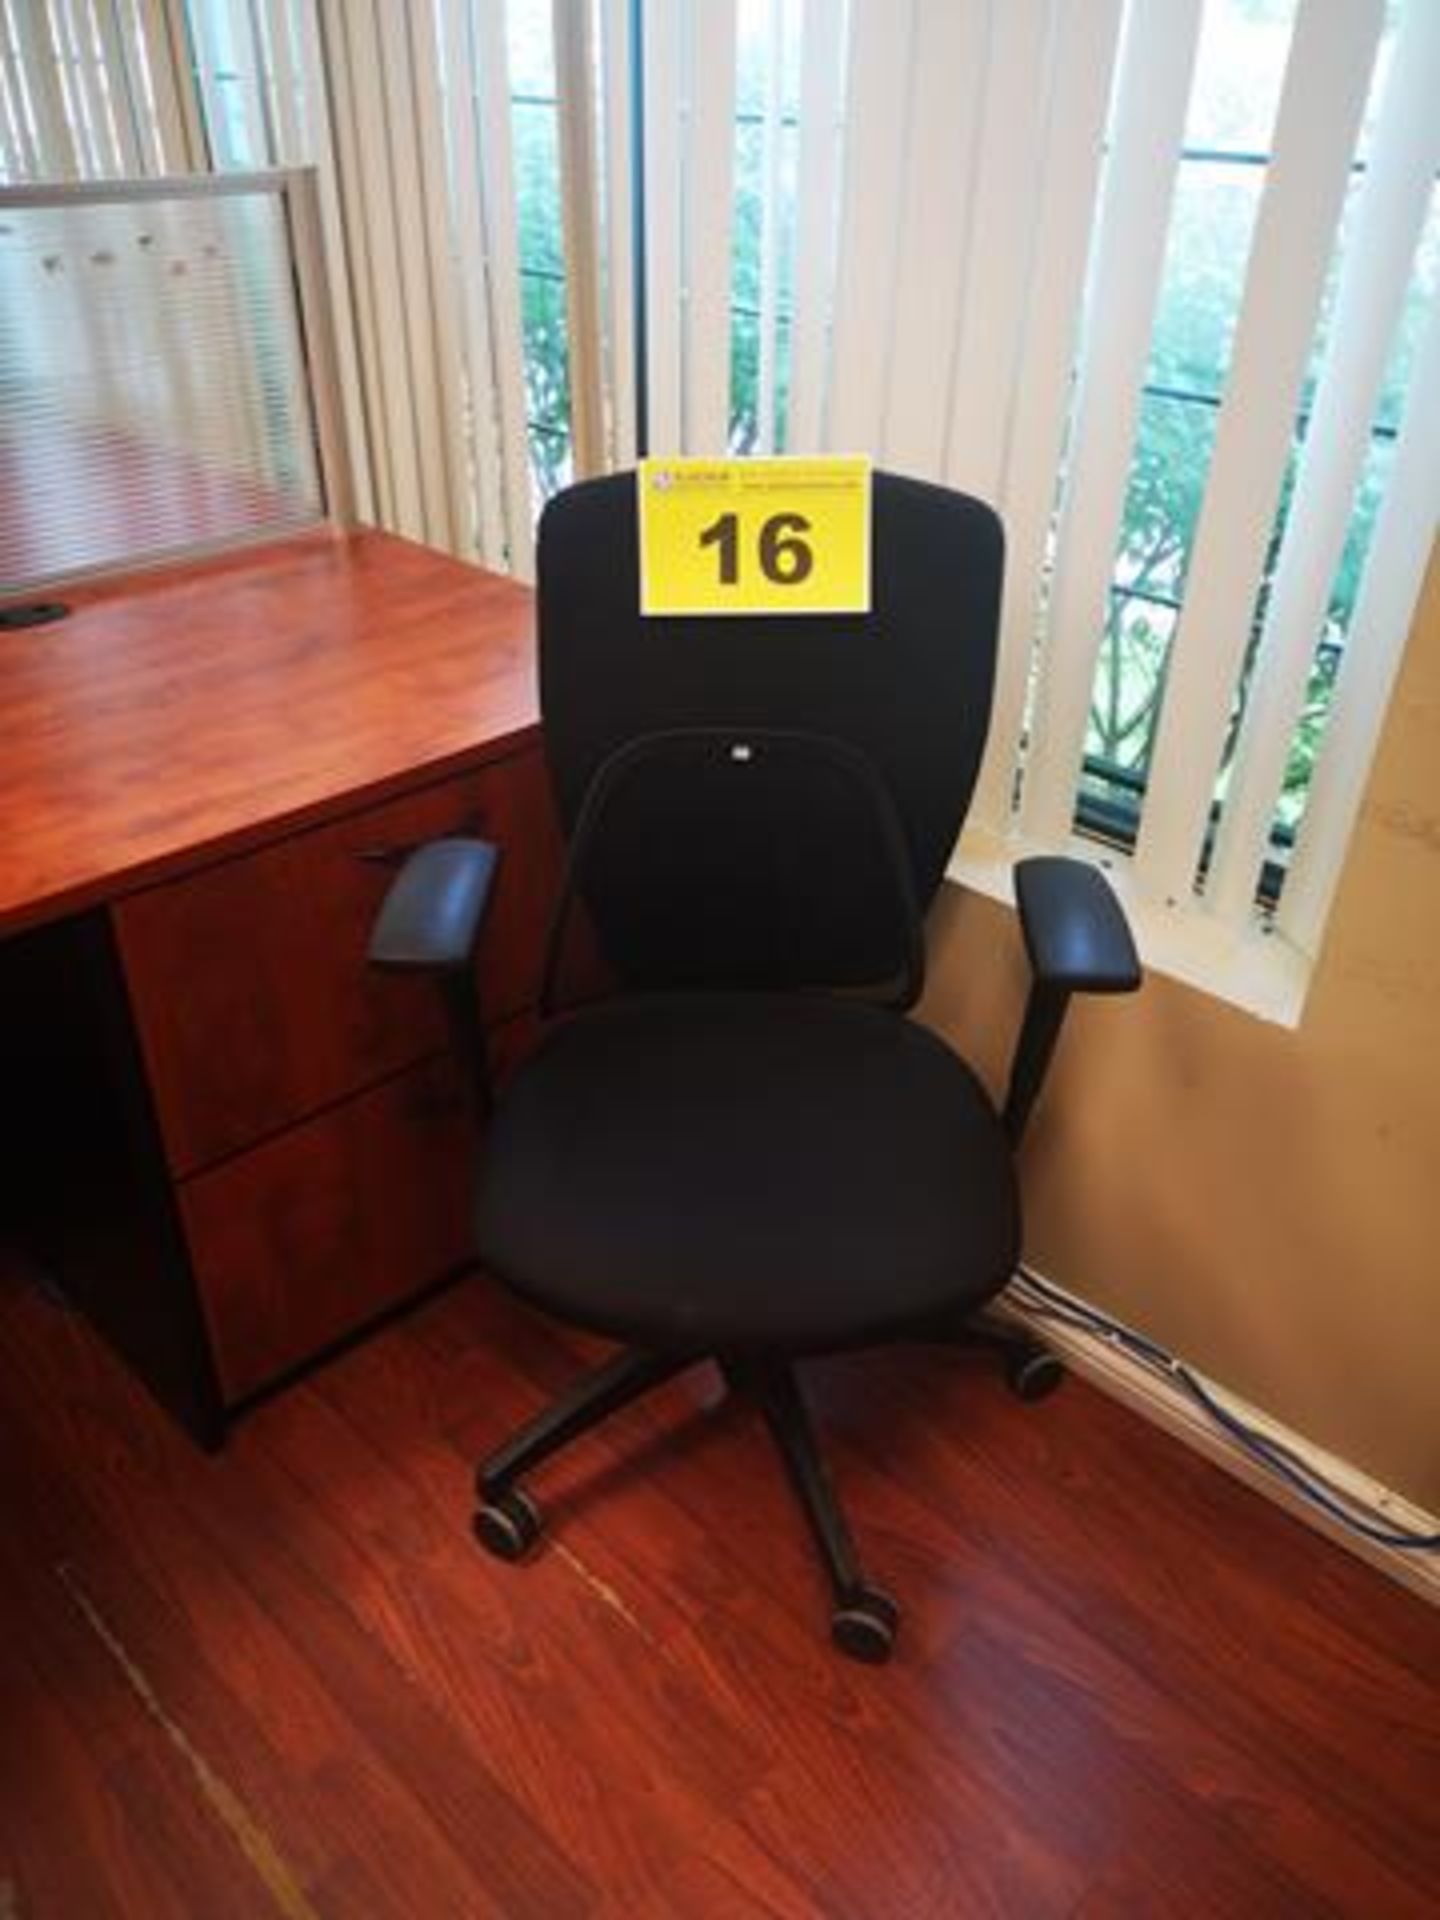 BLACK, FABRIC OFFICE CHAIR ON CASTERS